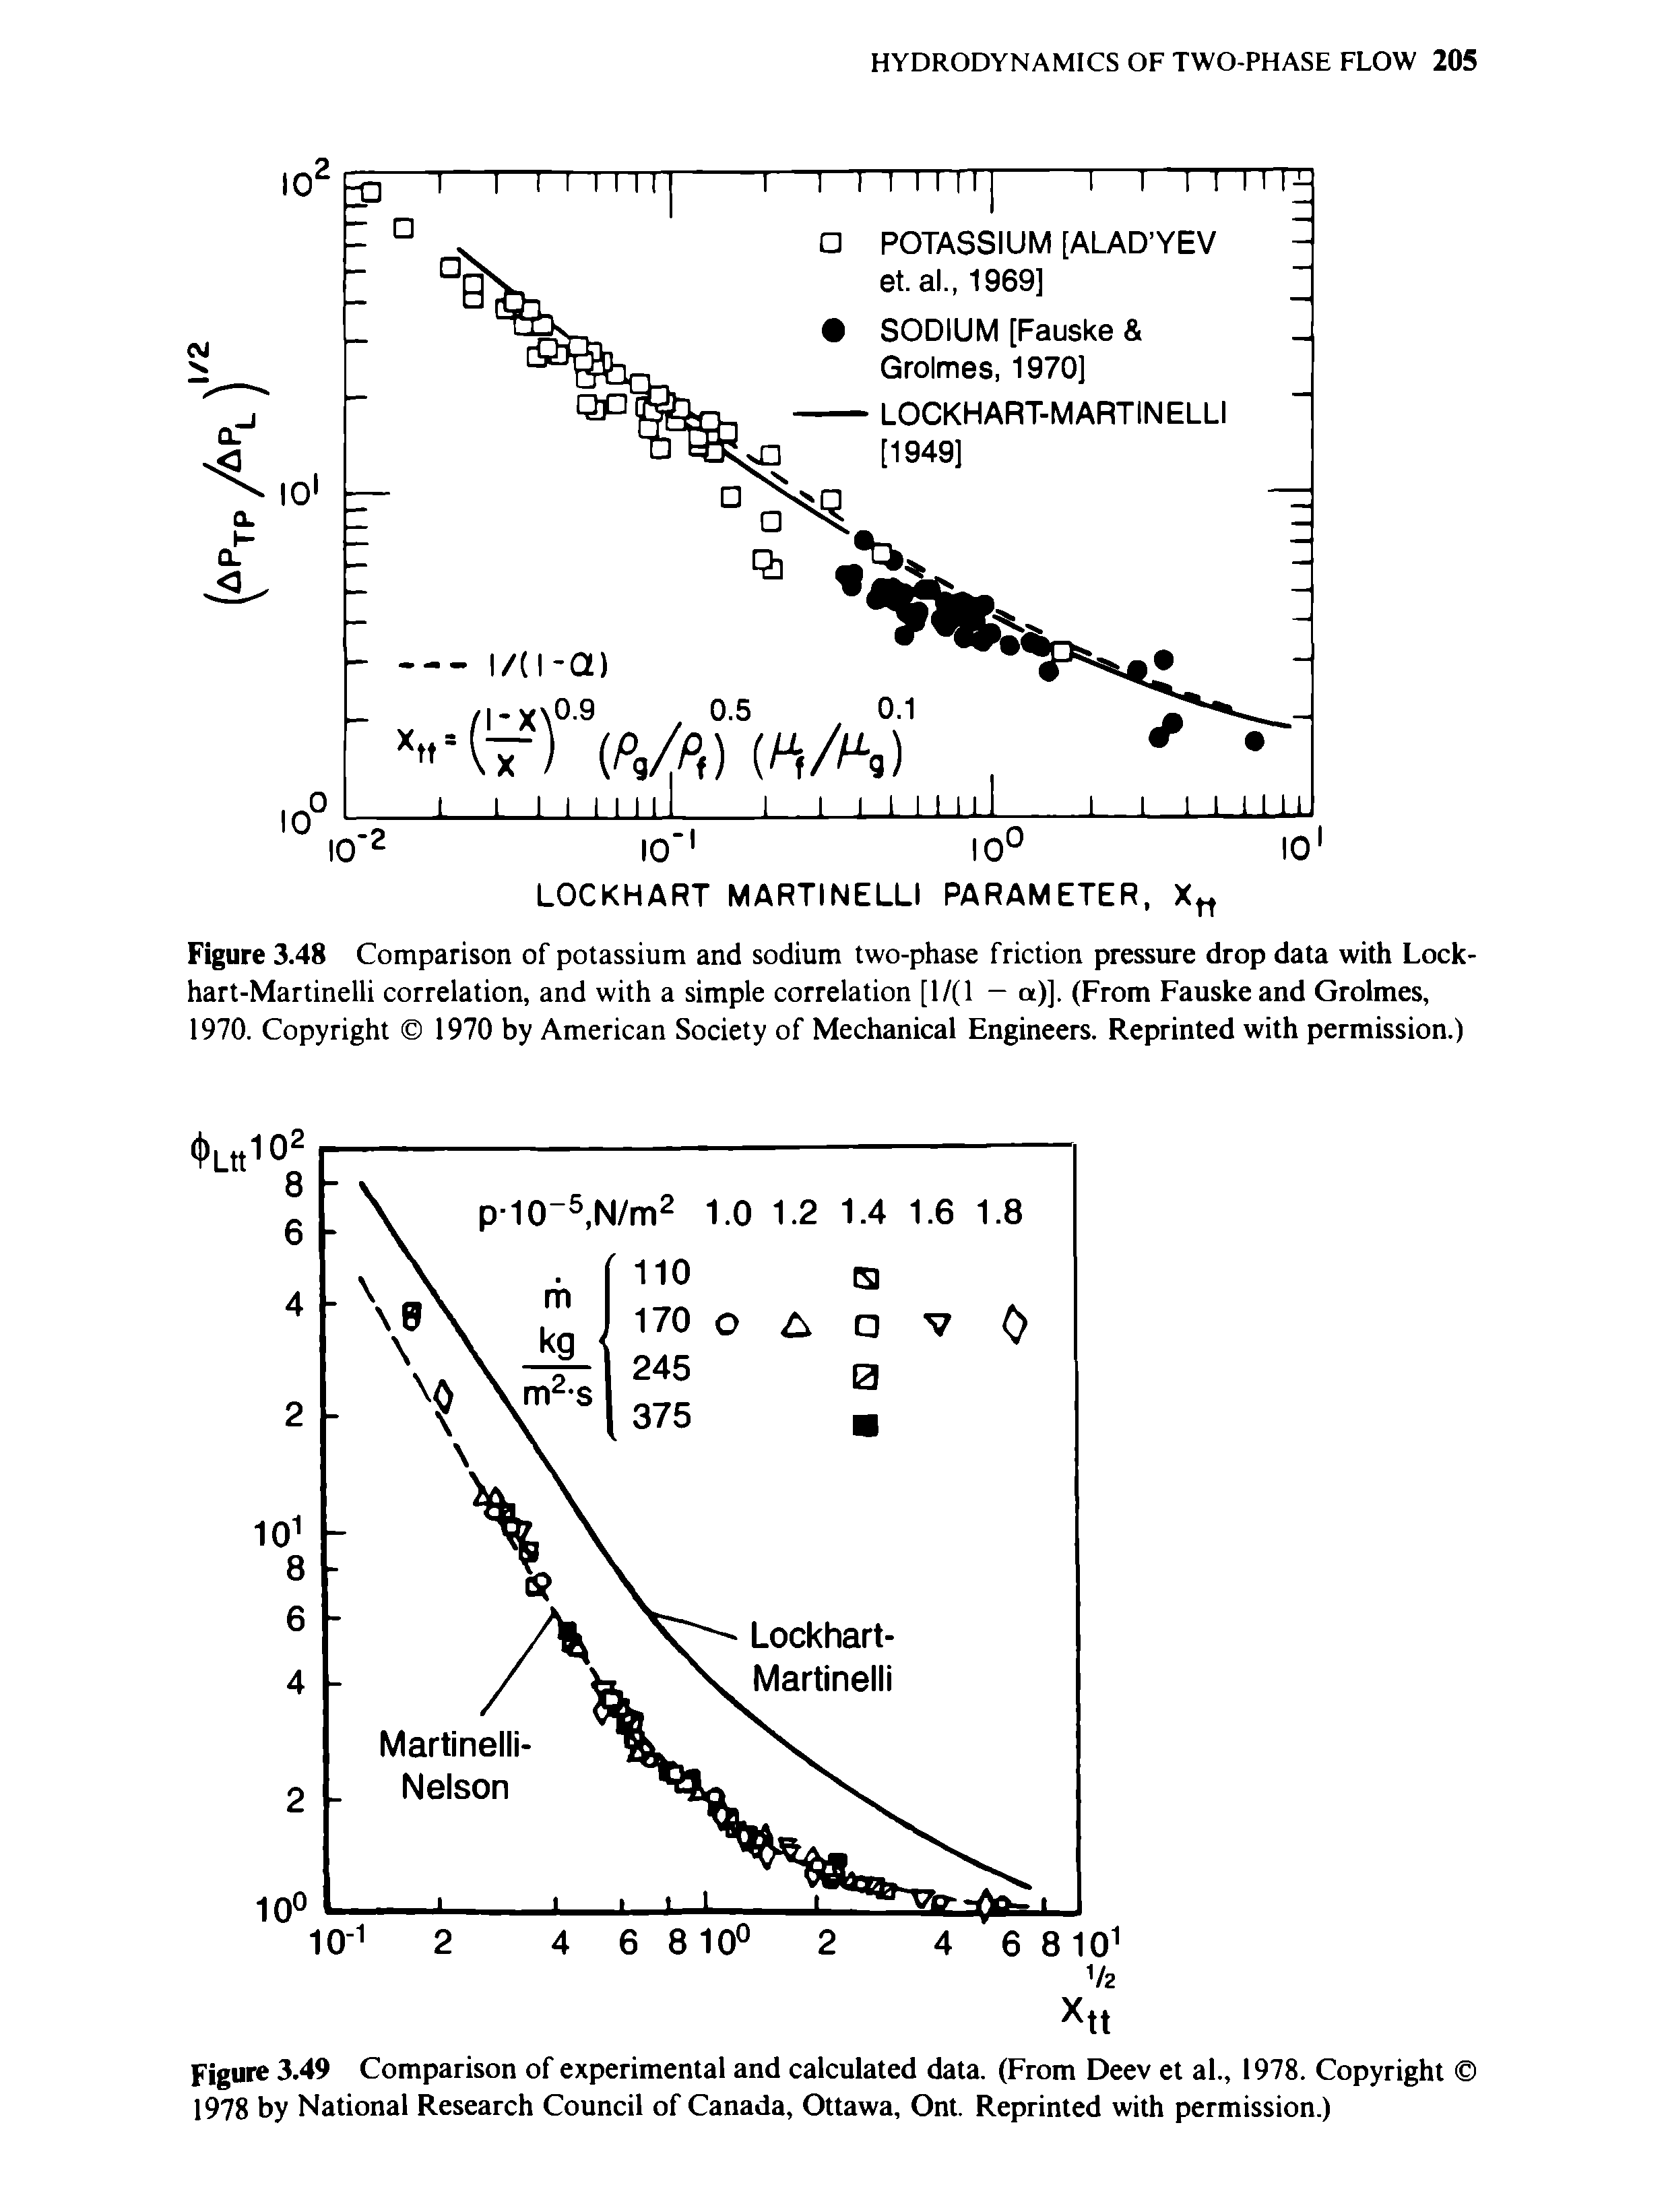 Figure 3.49 Comparison of experimental and calculated data. (From Deev et al., 1978. Copyright 1978 by National Research Council of Canada, Ottawa, Ont. Reprinted with permission.)...